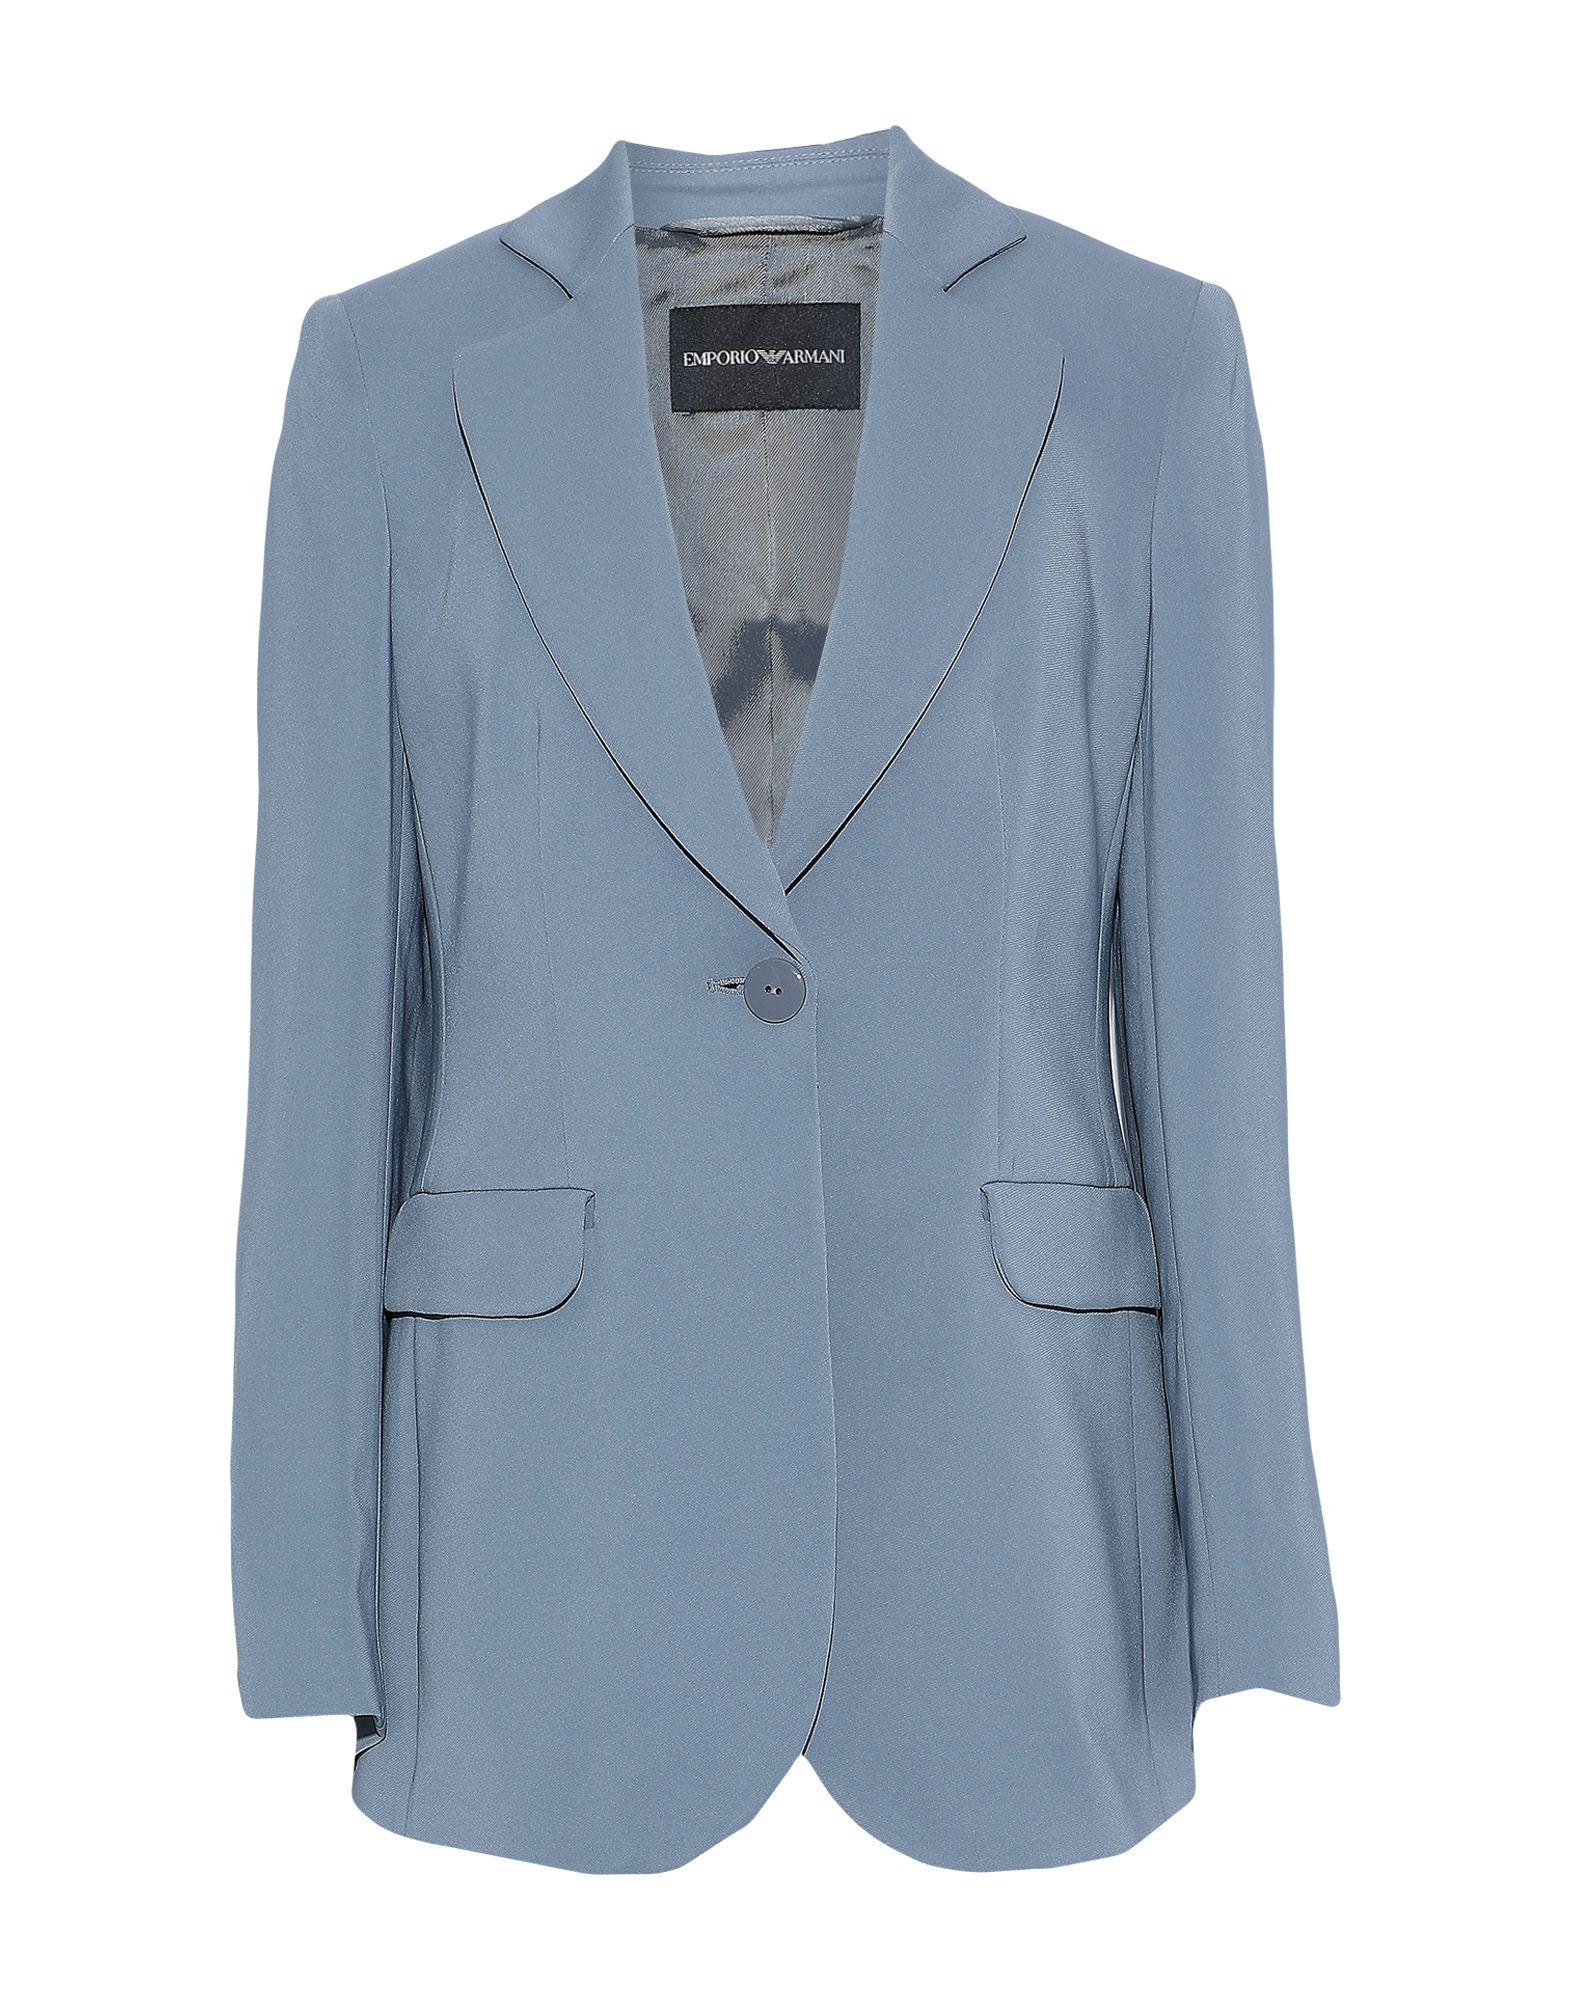 Emporio Armani Synthetic Suit Jacket in Pastel Blue (Blue) - Lyst